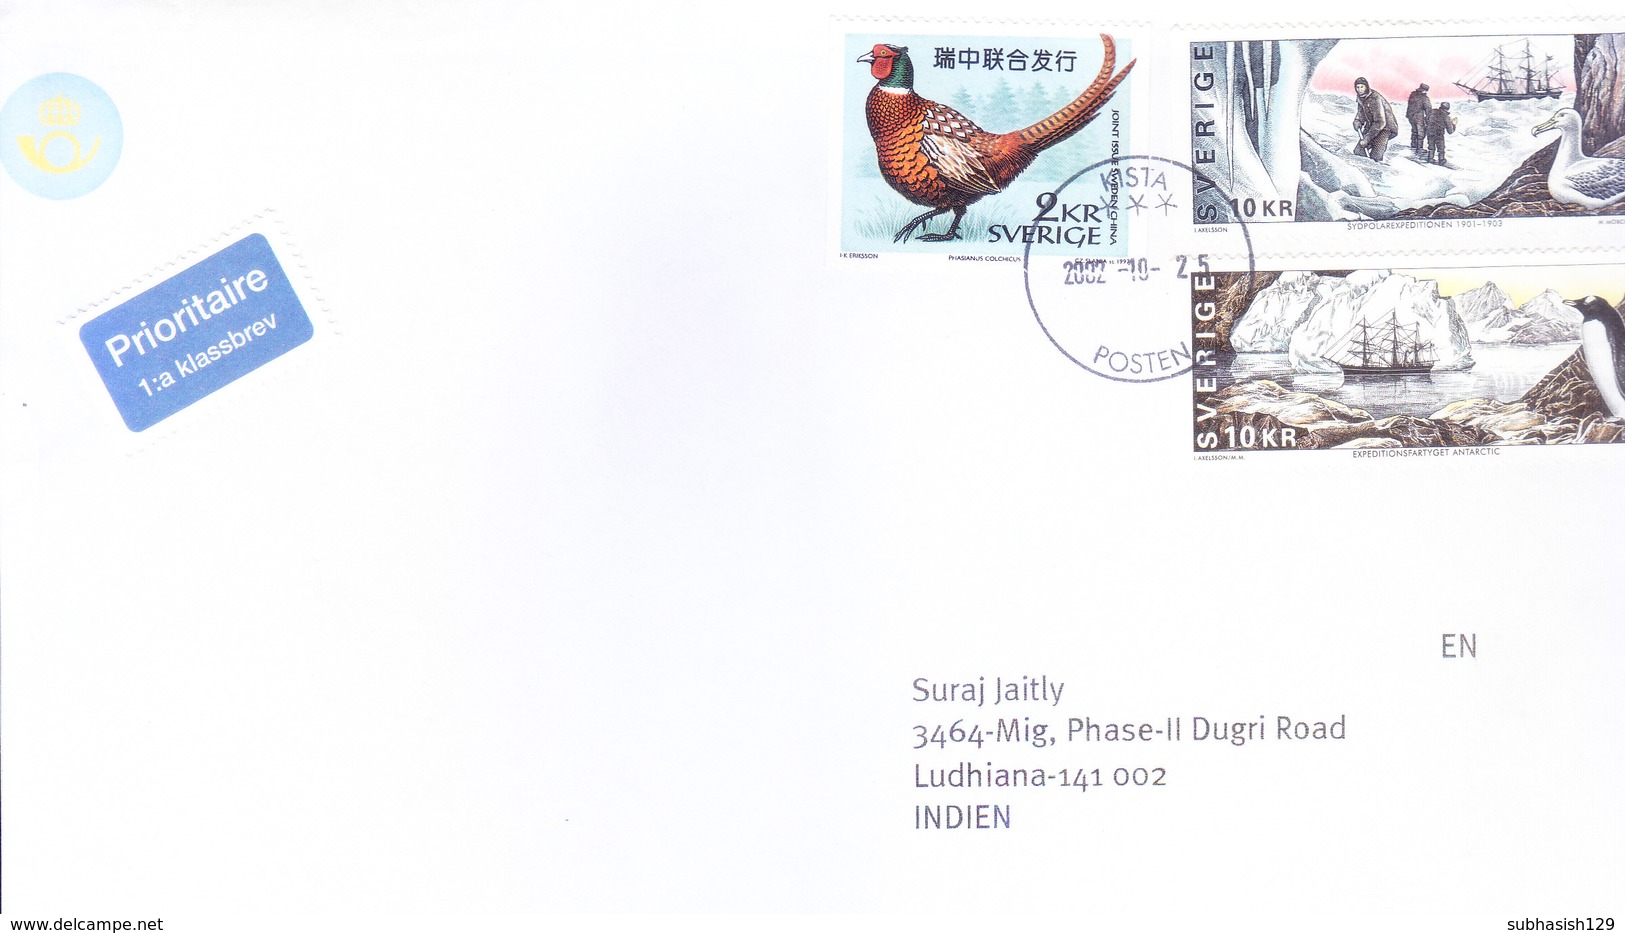 SWEDEN 2002 COMMERCIAL COVER POSTED FROM KISTA FOR INDIA - ANTARCTIC EXPEDITION STAMP, SWEDEN CHINA JOINT ISSUE STAMP - Storia Postale